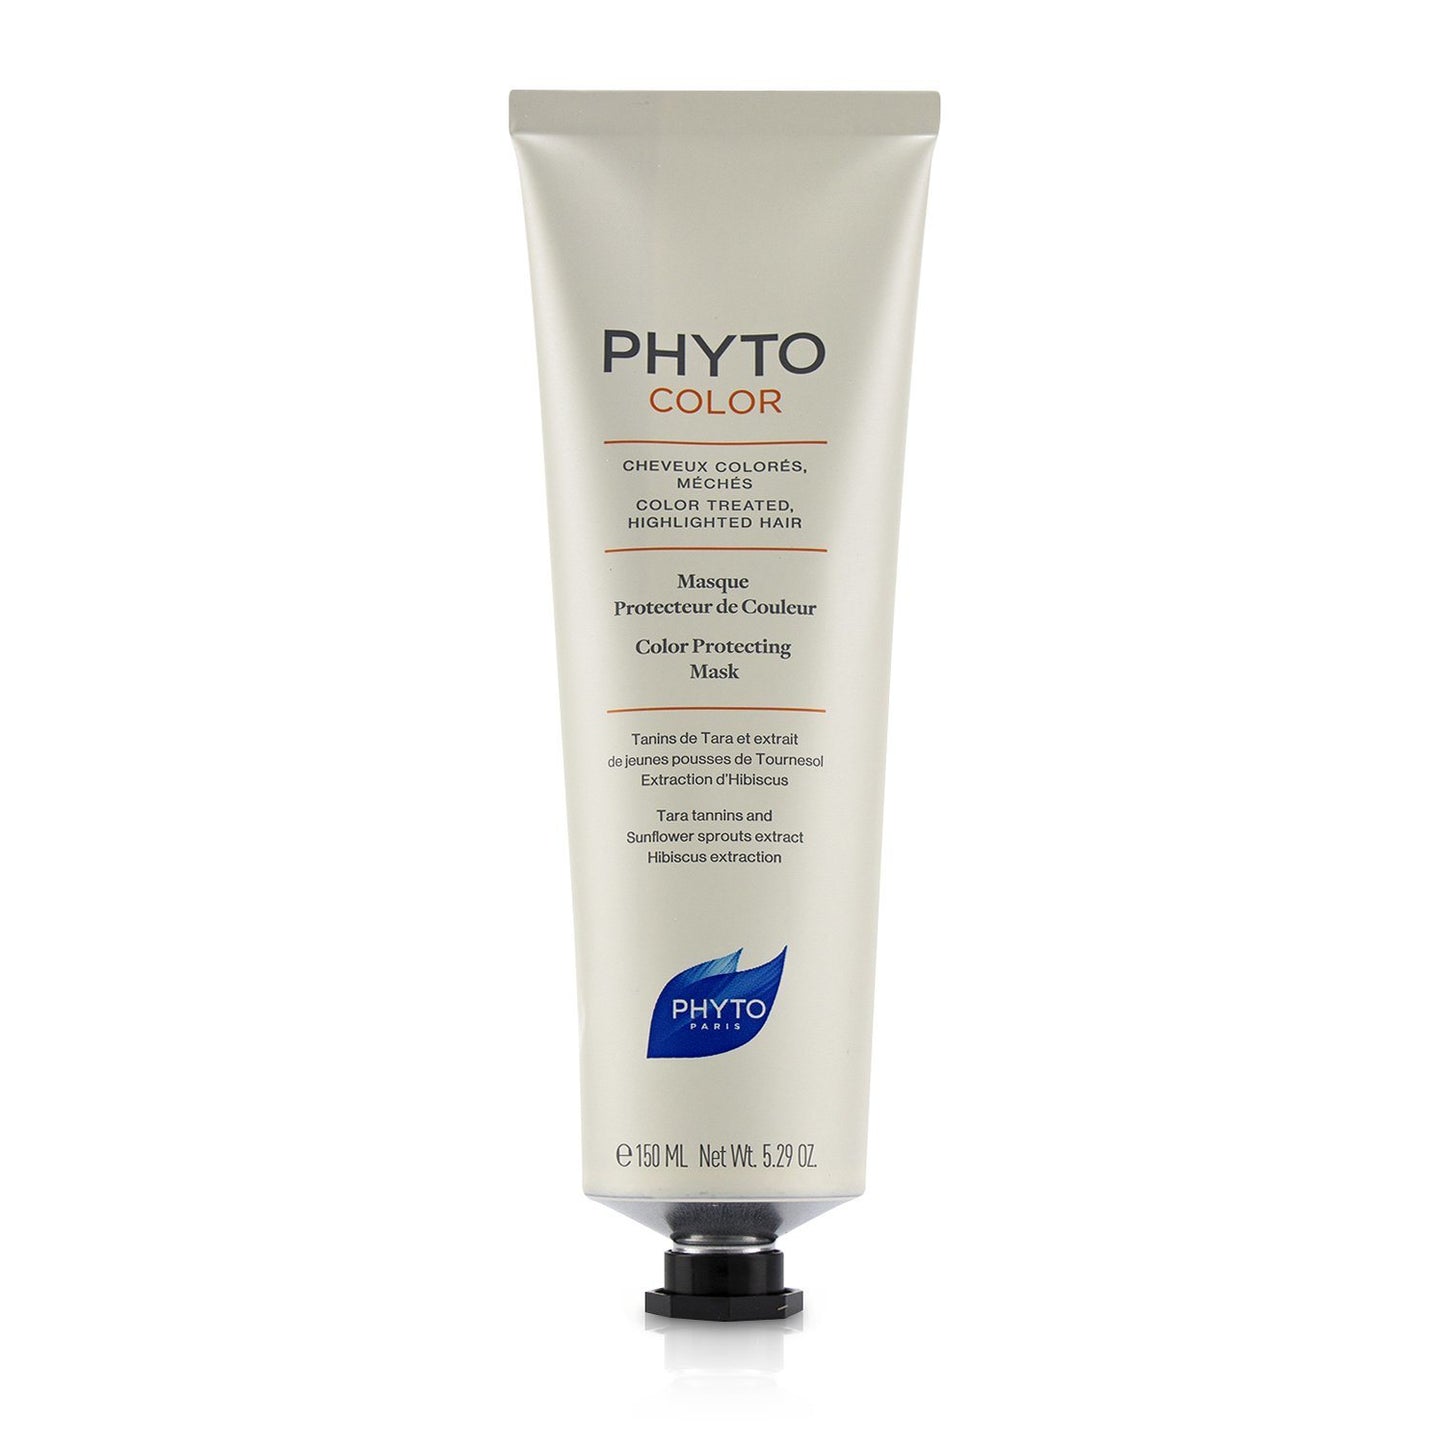 PHYTO - PhytoColor Color Protecting Mask (Color-Treated, Highlighted Hair)   PH10029A31590 150ml/5.29oz